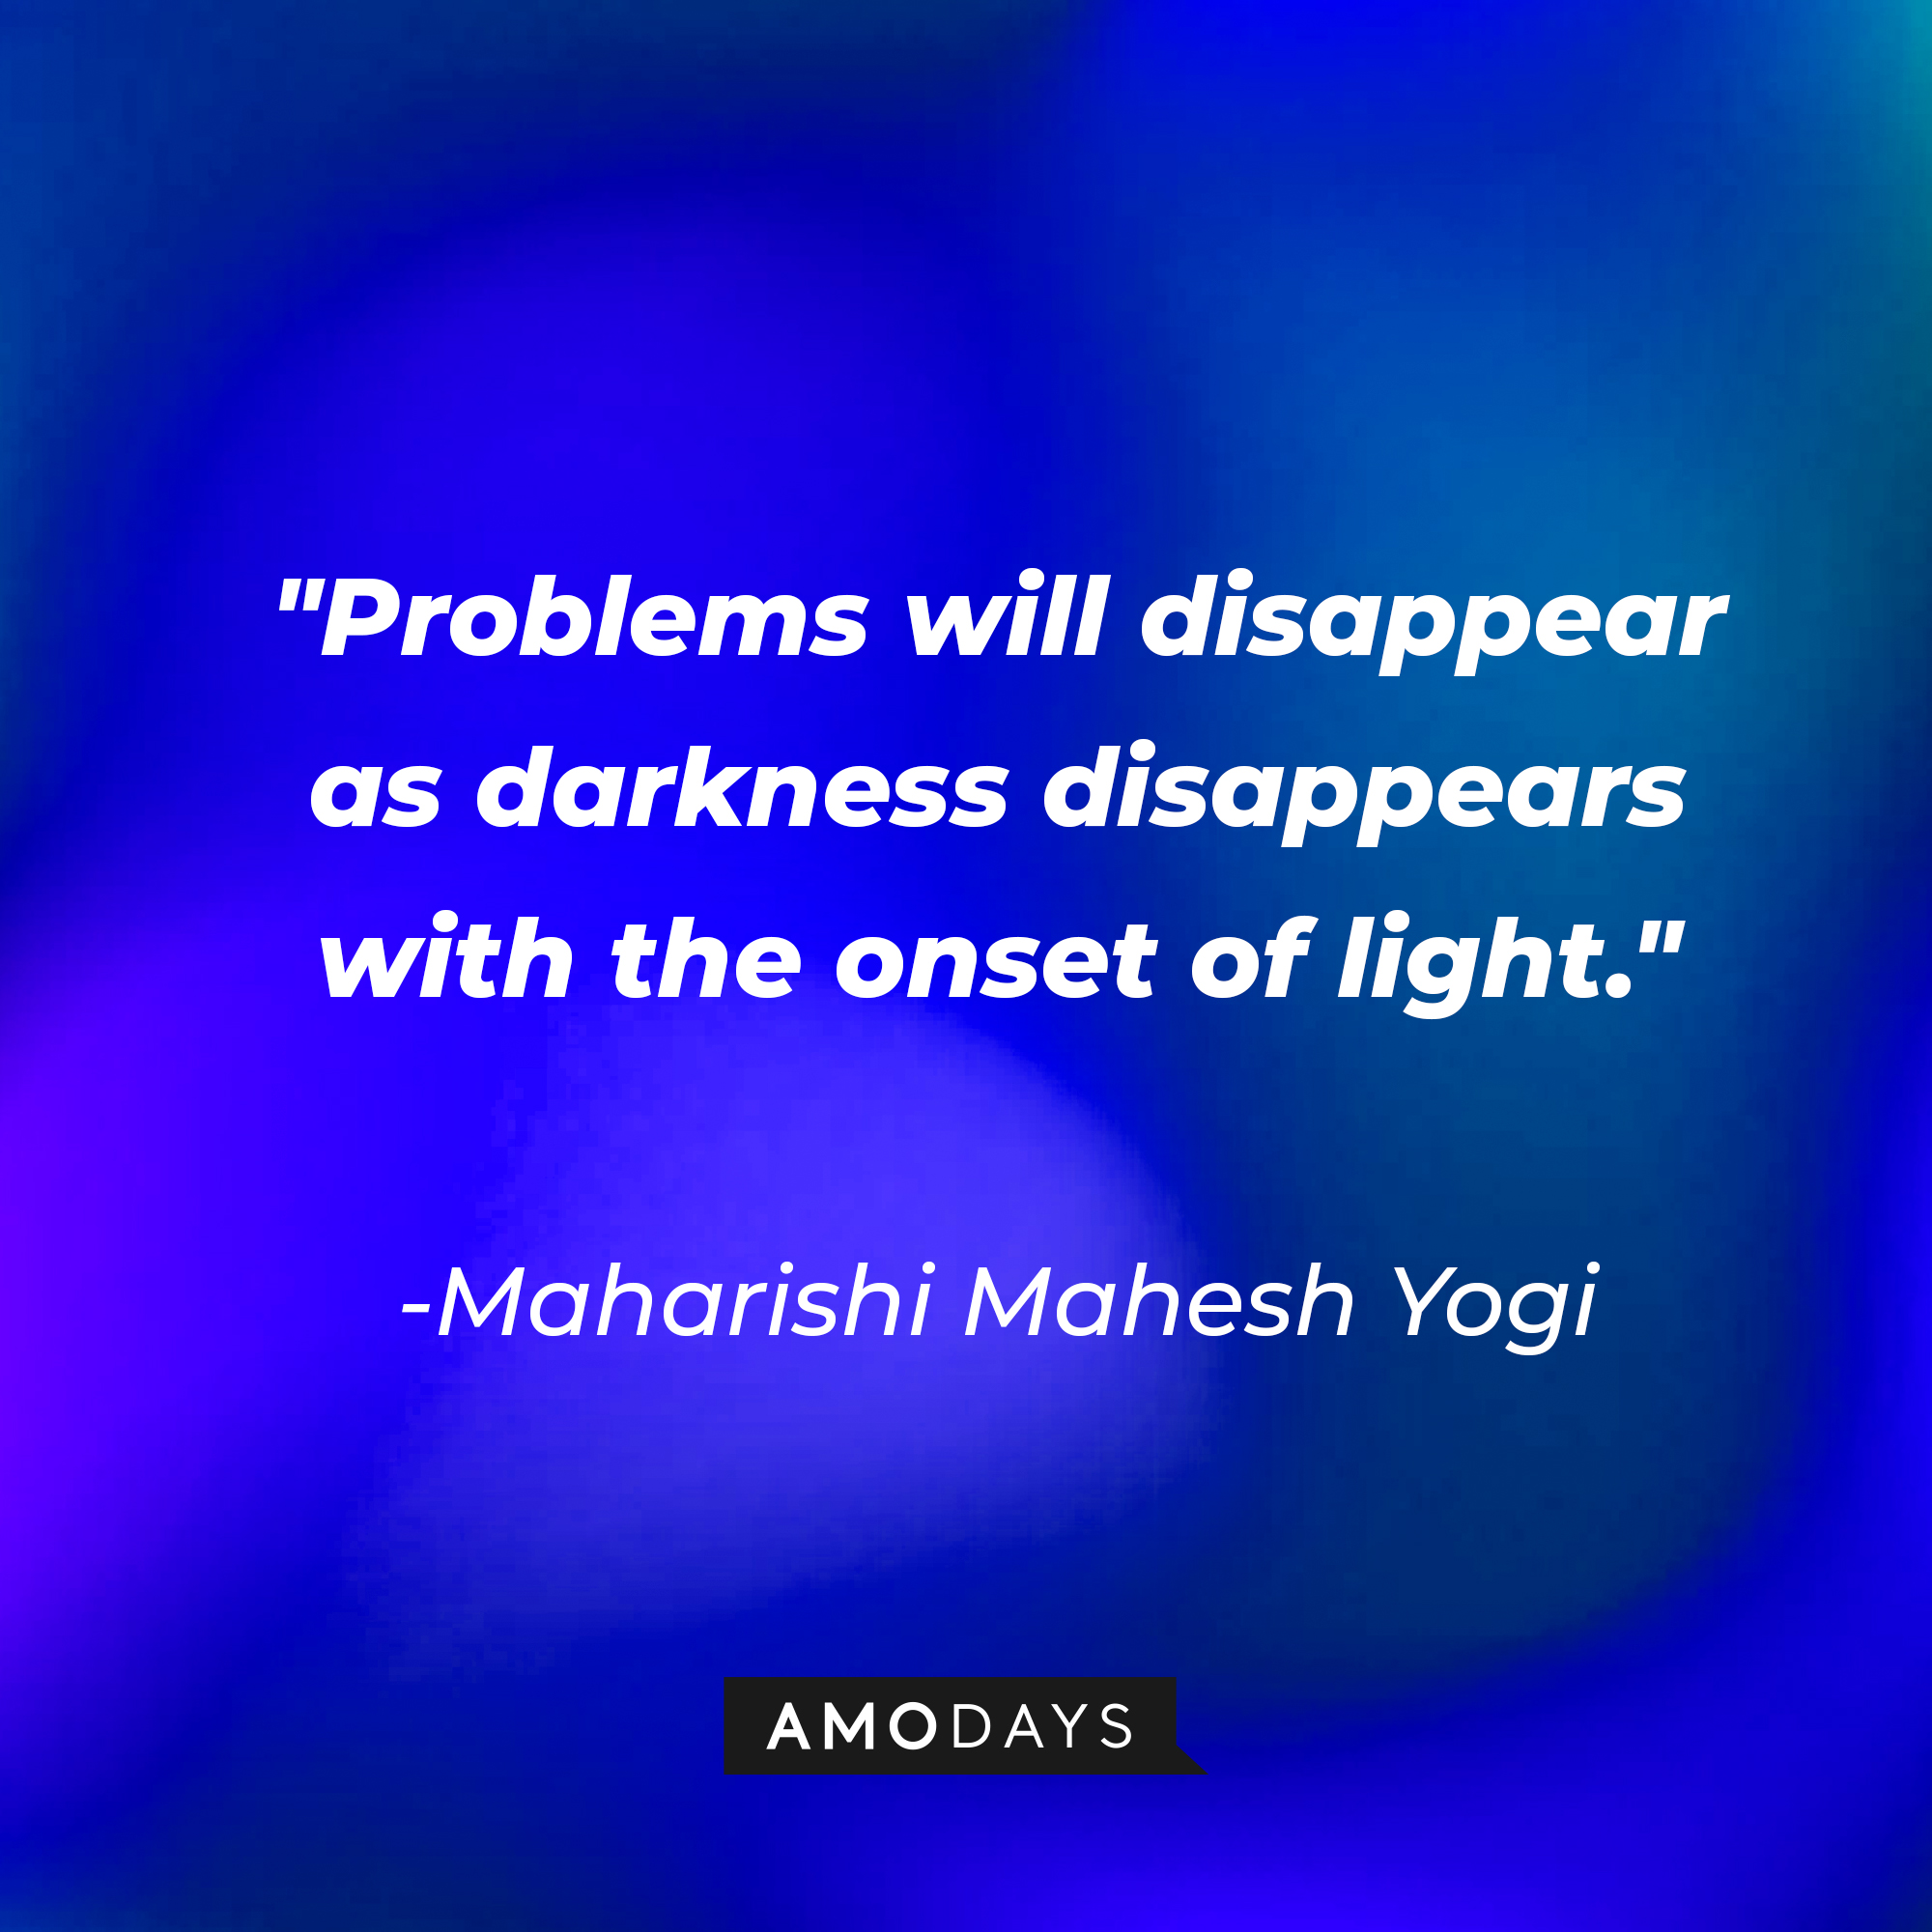 Maharishi Mahesh Yogi's quote: "Problems will disappear as darkness disappears with the onset of light." | Image: AmoDays